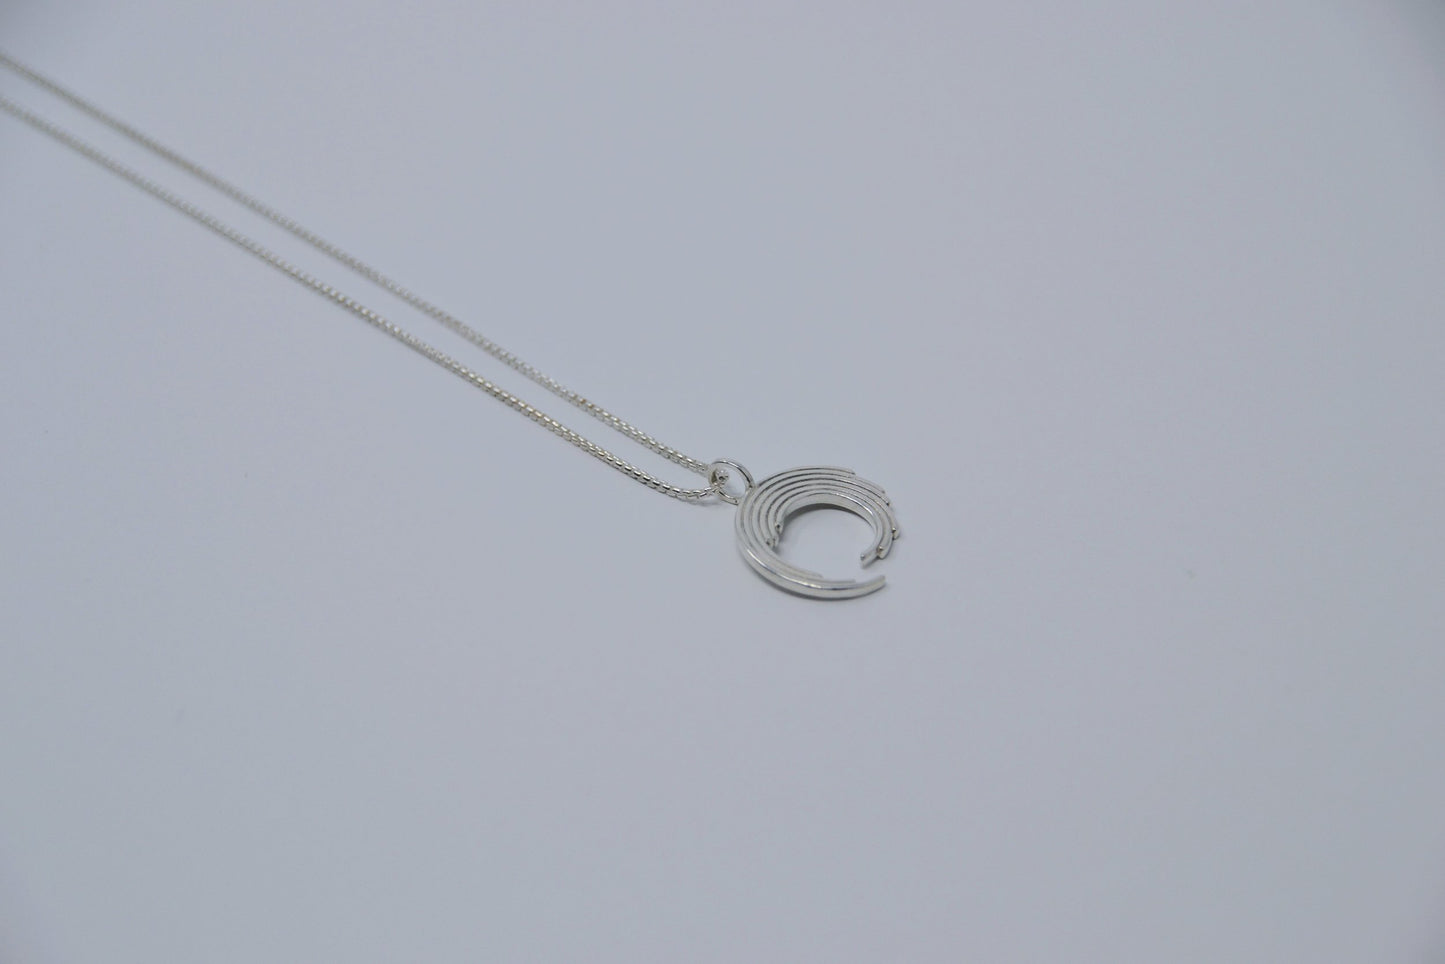 The Small O Necklace